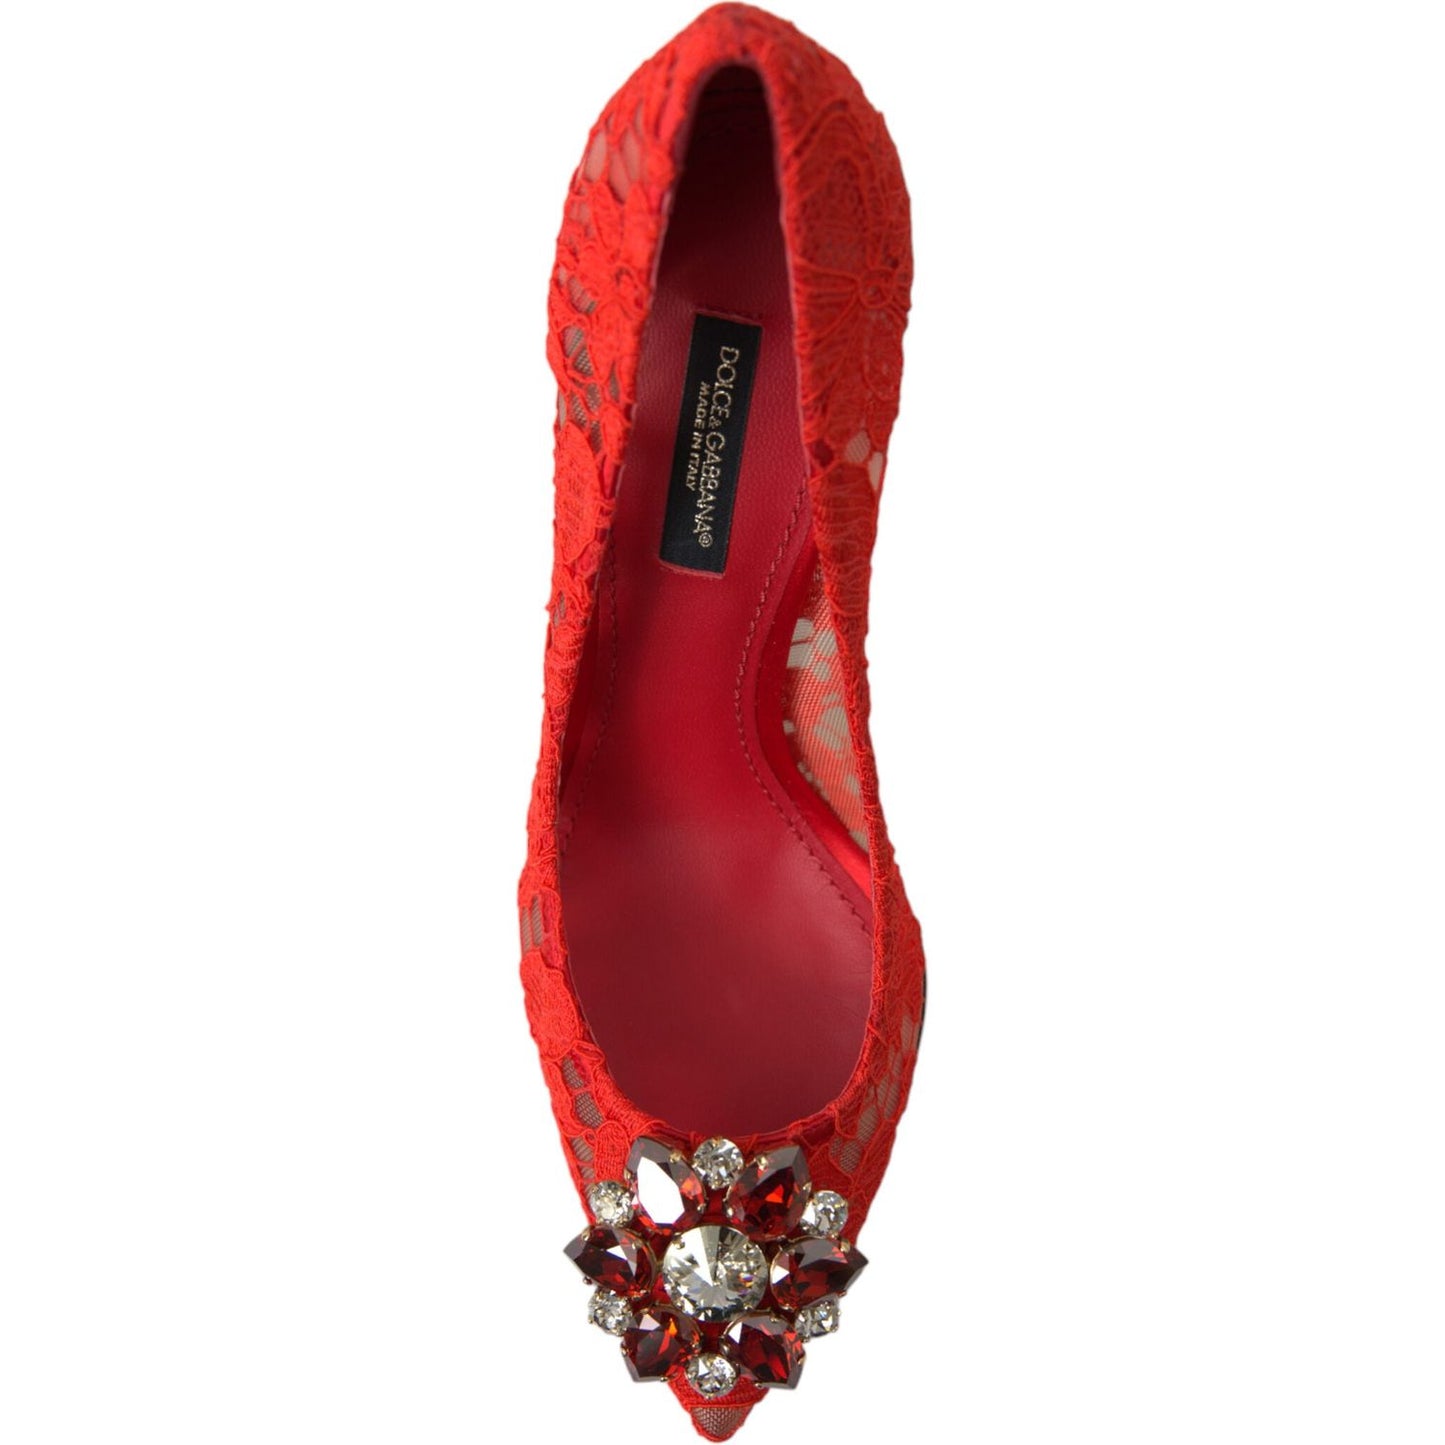 Dolce & Gabbana Exquisite Crystal-Embellished Red Lace Heels red-taormina-lace-crystal-heels-pumps-shoes-1 465A9201-bg-scaled-52acbe3e-d61.jpg